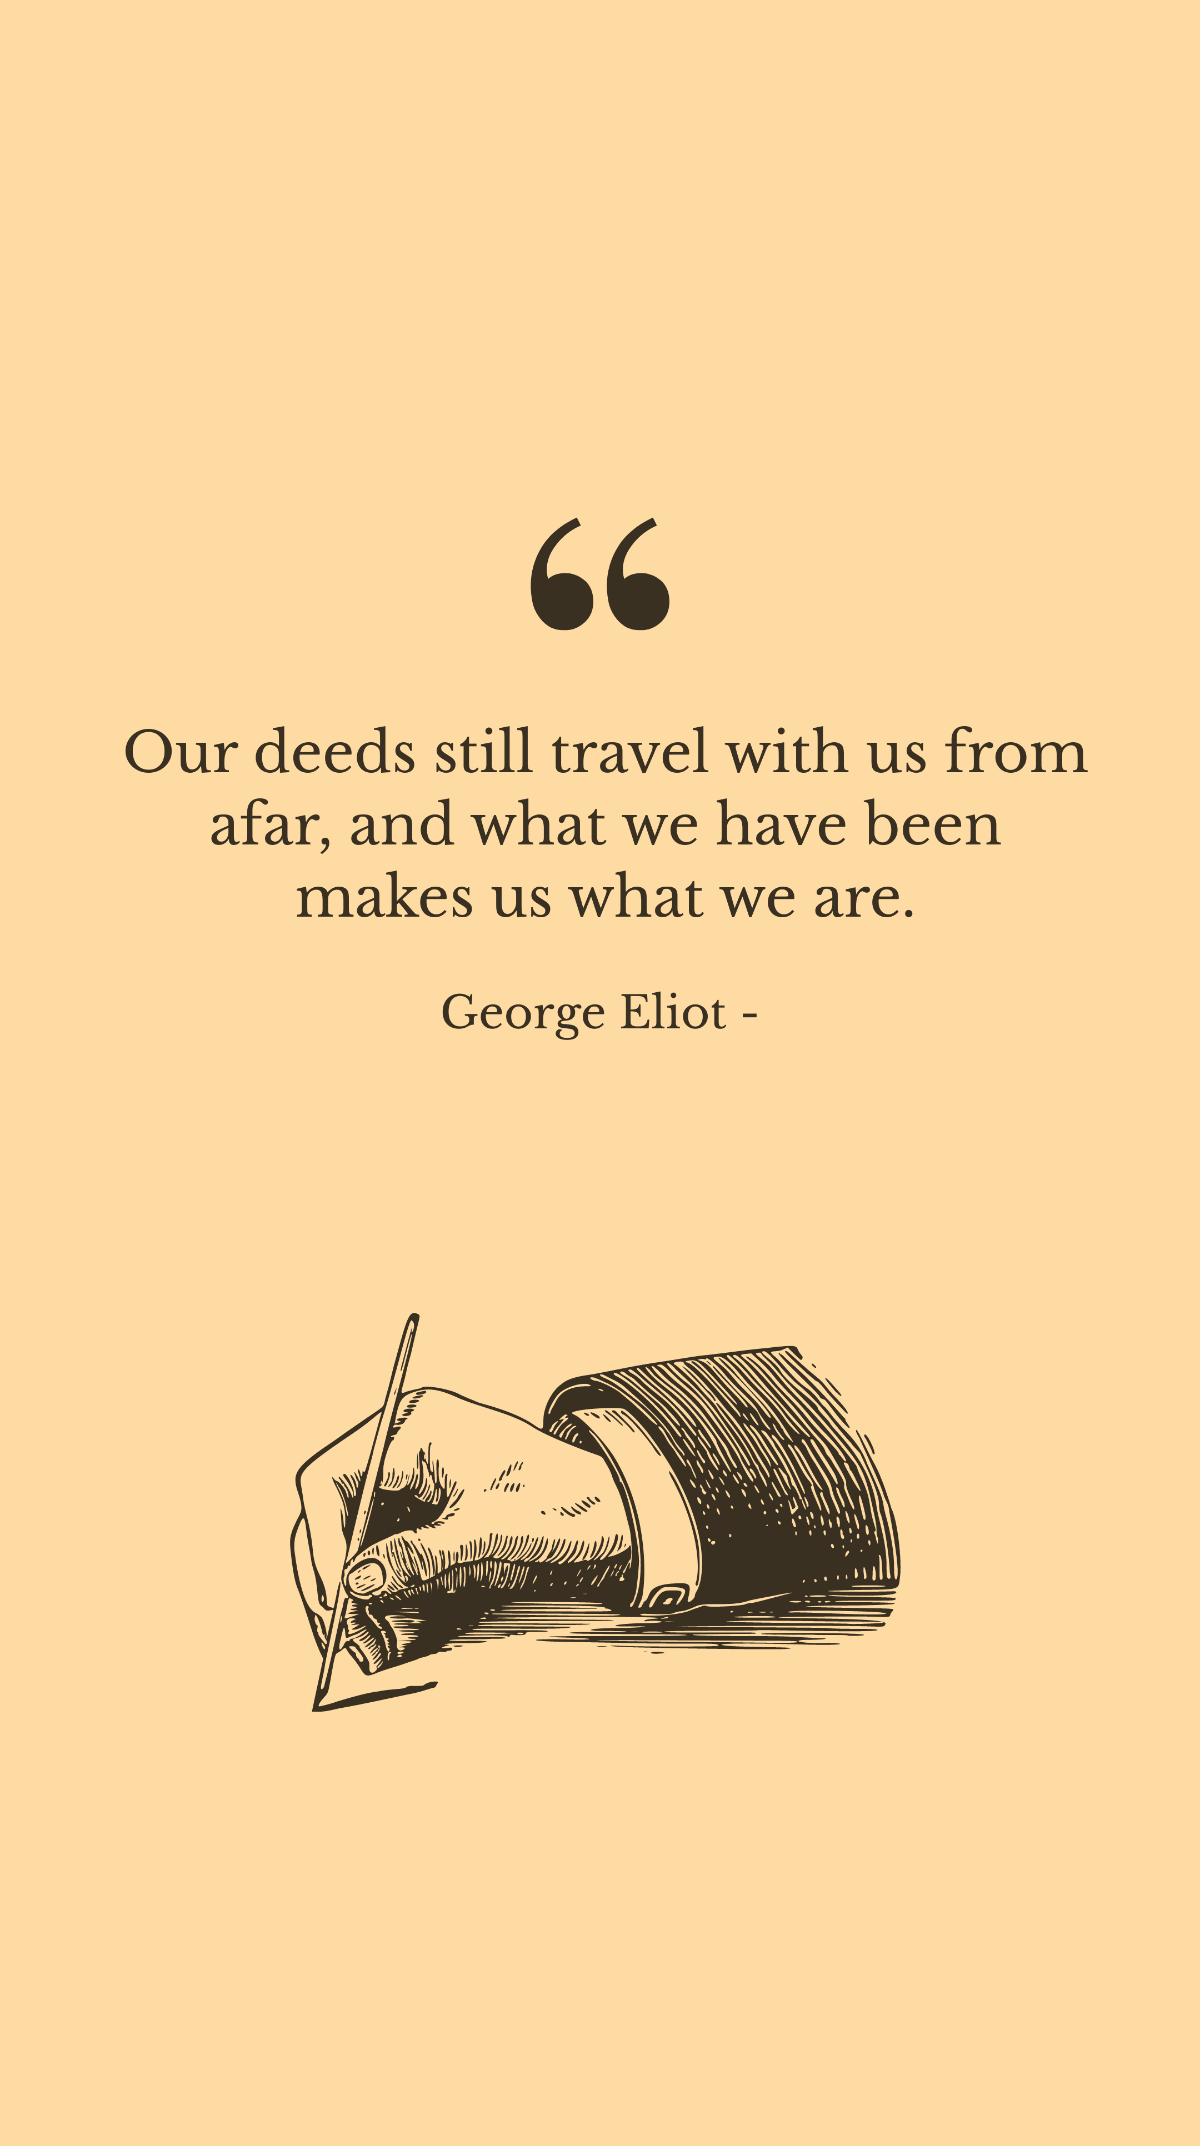 Free George Eliot - Our deeds still travel with us from afar, and what we have been makes us what we are. Template